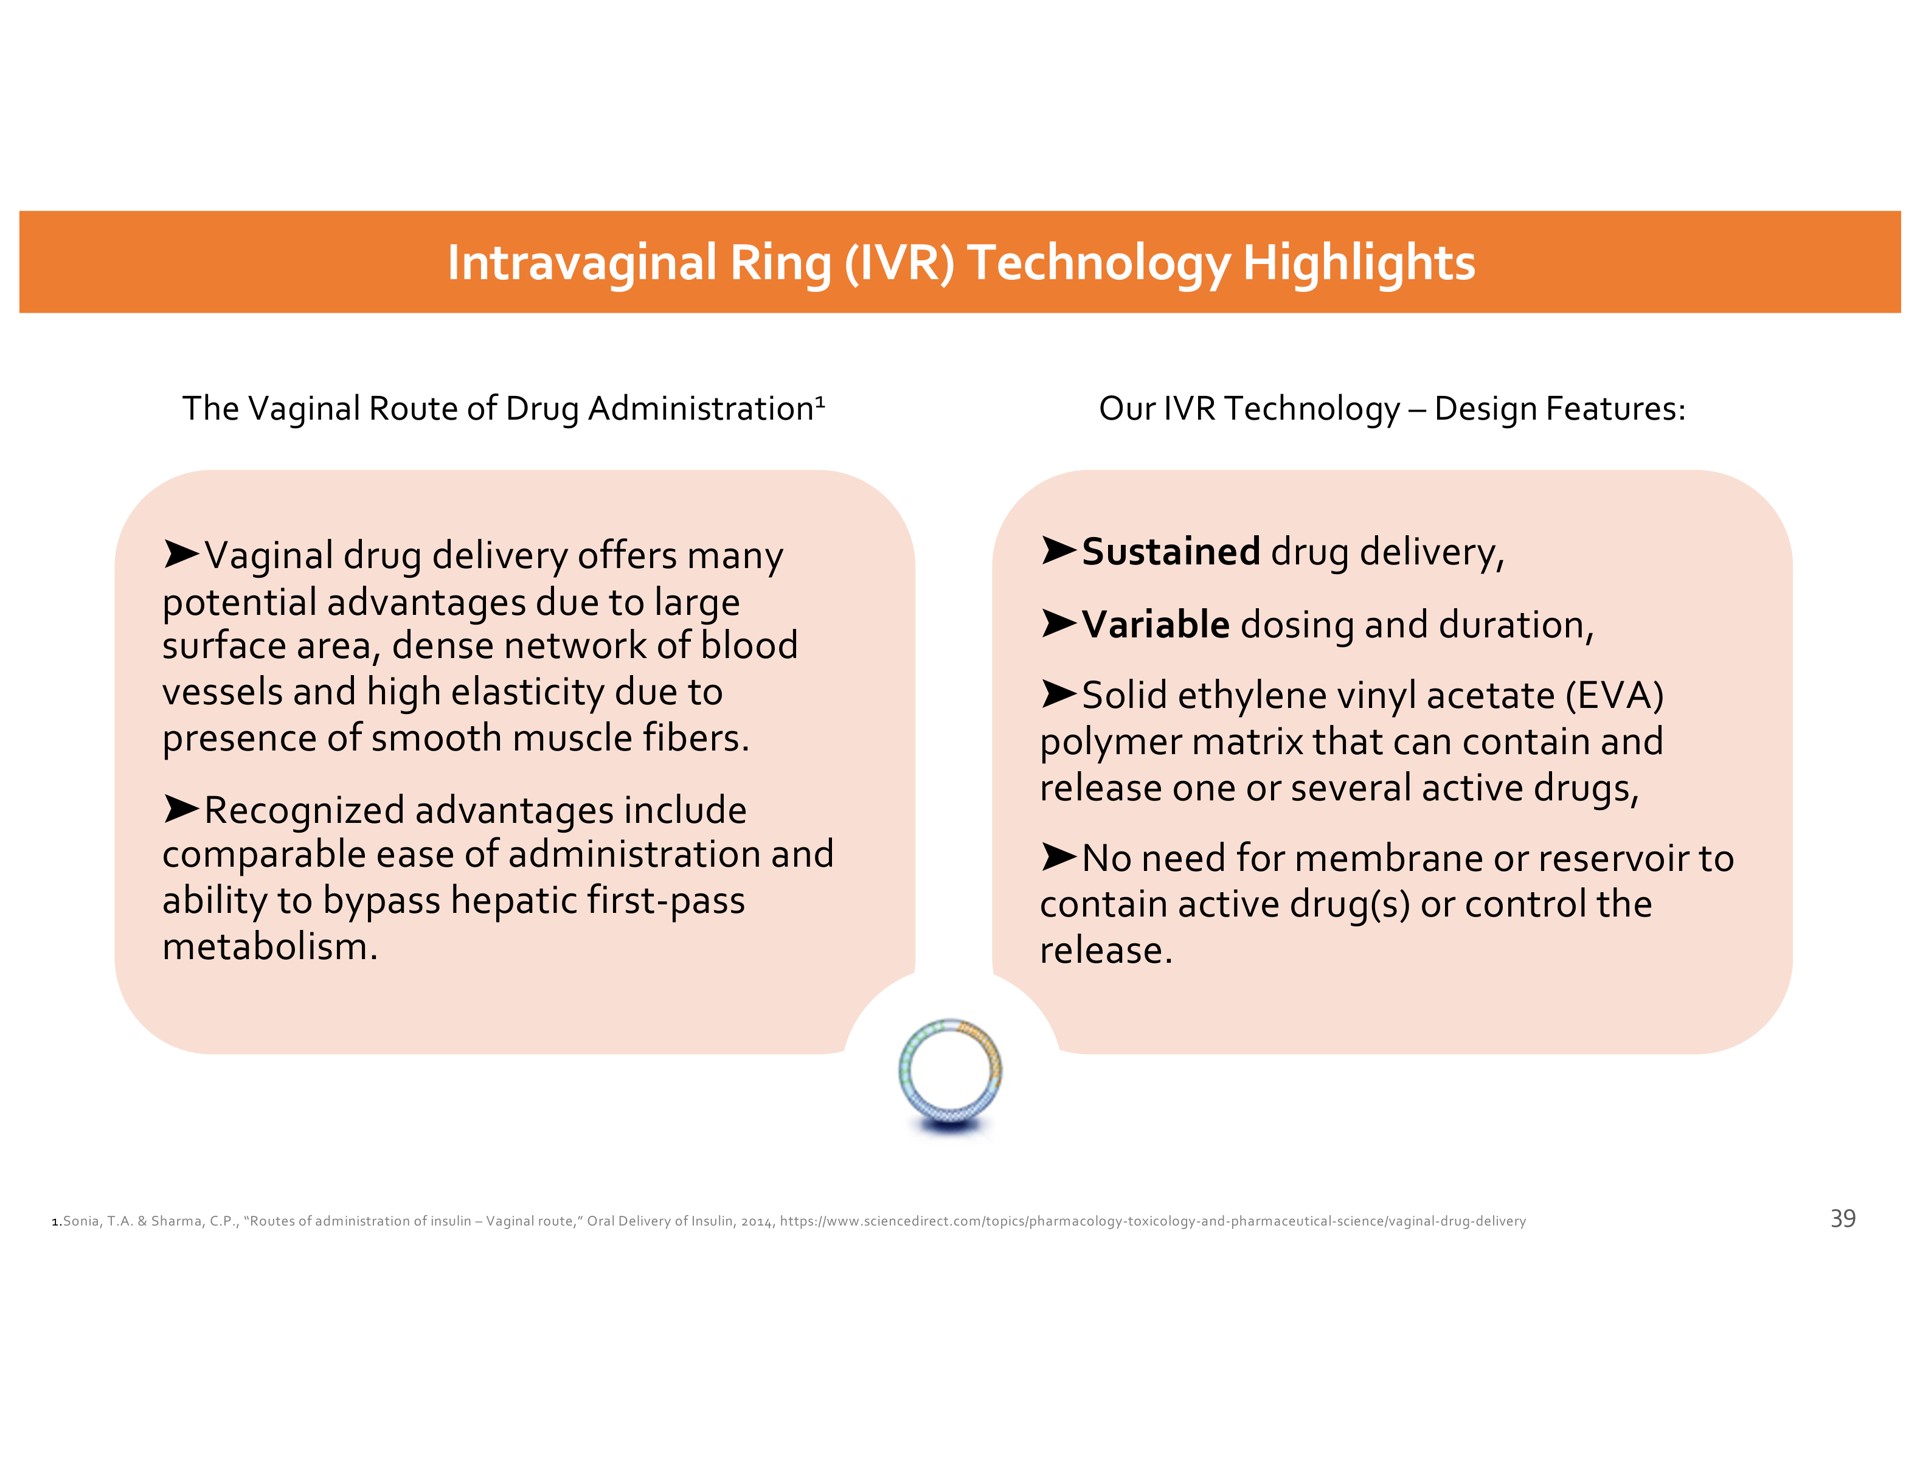 intravaginal ring technology highlights the vaginal route of drug administration our technology design features vaginal drug delivery offers many potential advantages due to large surface area dense network of blood vessels and high elasticity due to presence of smooth muscle fibers recognized advantages include comparable ease of administration and ability to bypass hepatic first pass metabolism sustained drug delivery variable dosing and duration solid ethylene vinyl acetate polymer matrix that can contain and release one or several active drugs no need for membrane or reservoir to contain active drug or control the release | Dare Bioscience